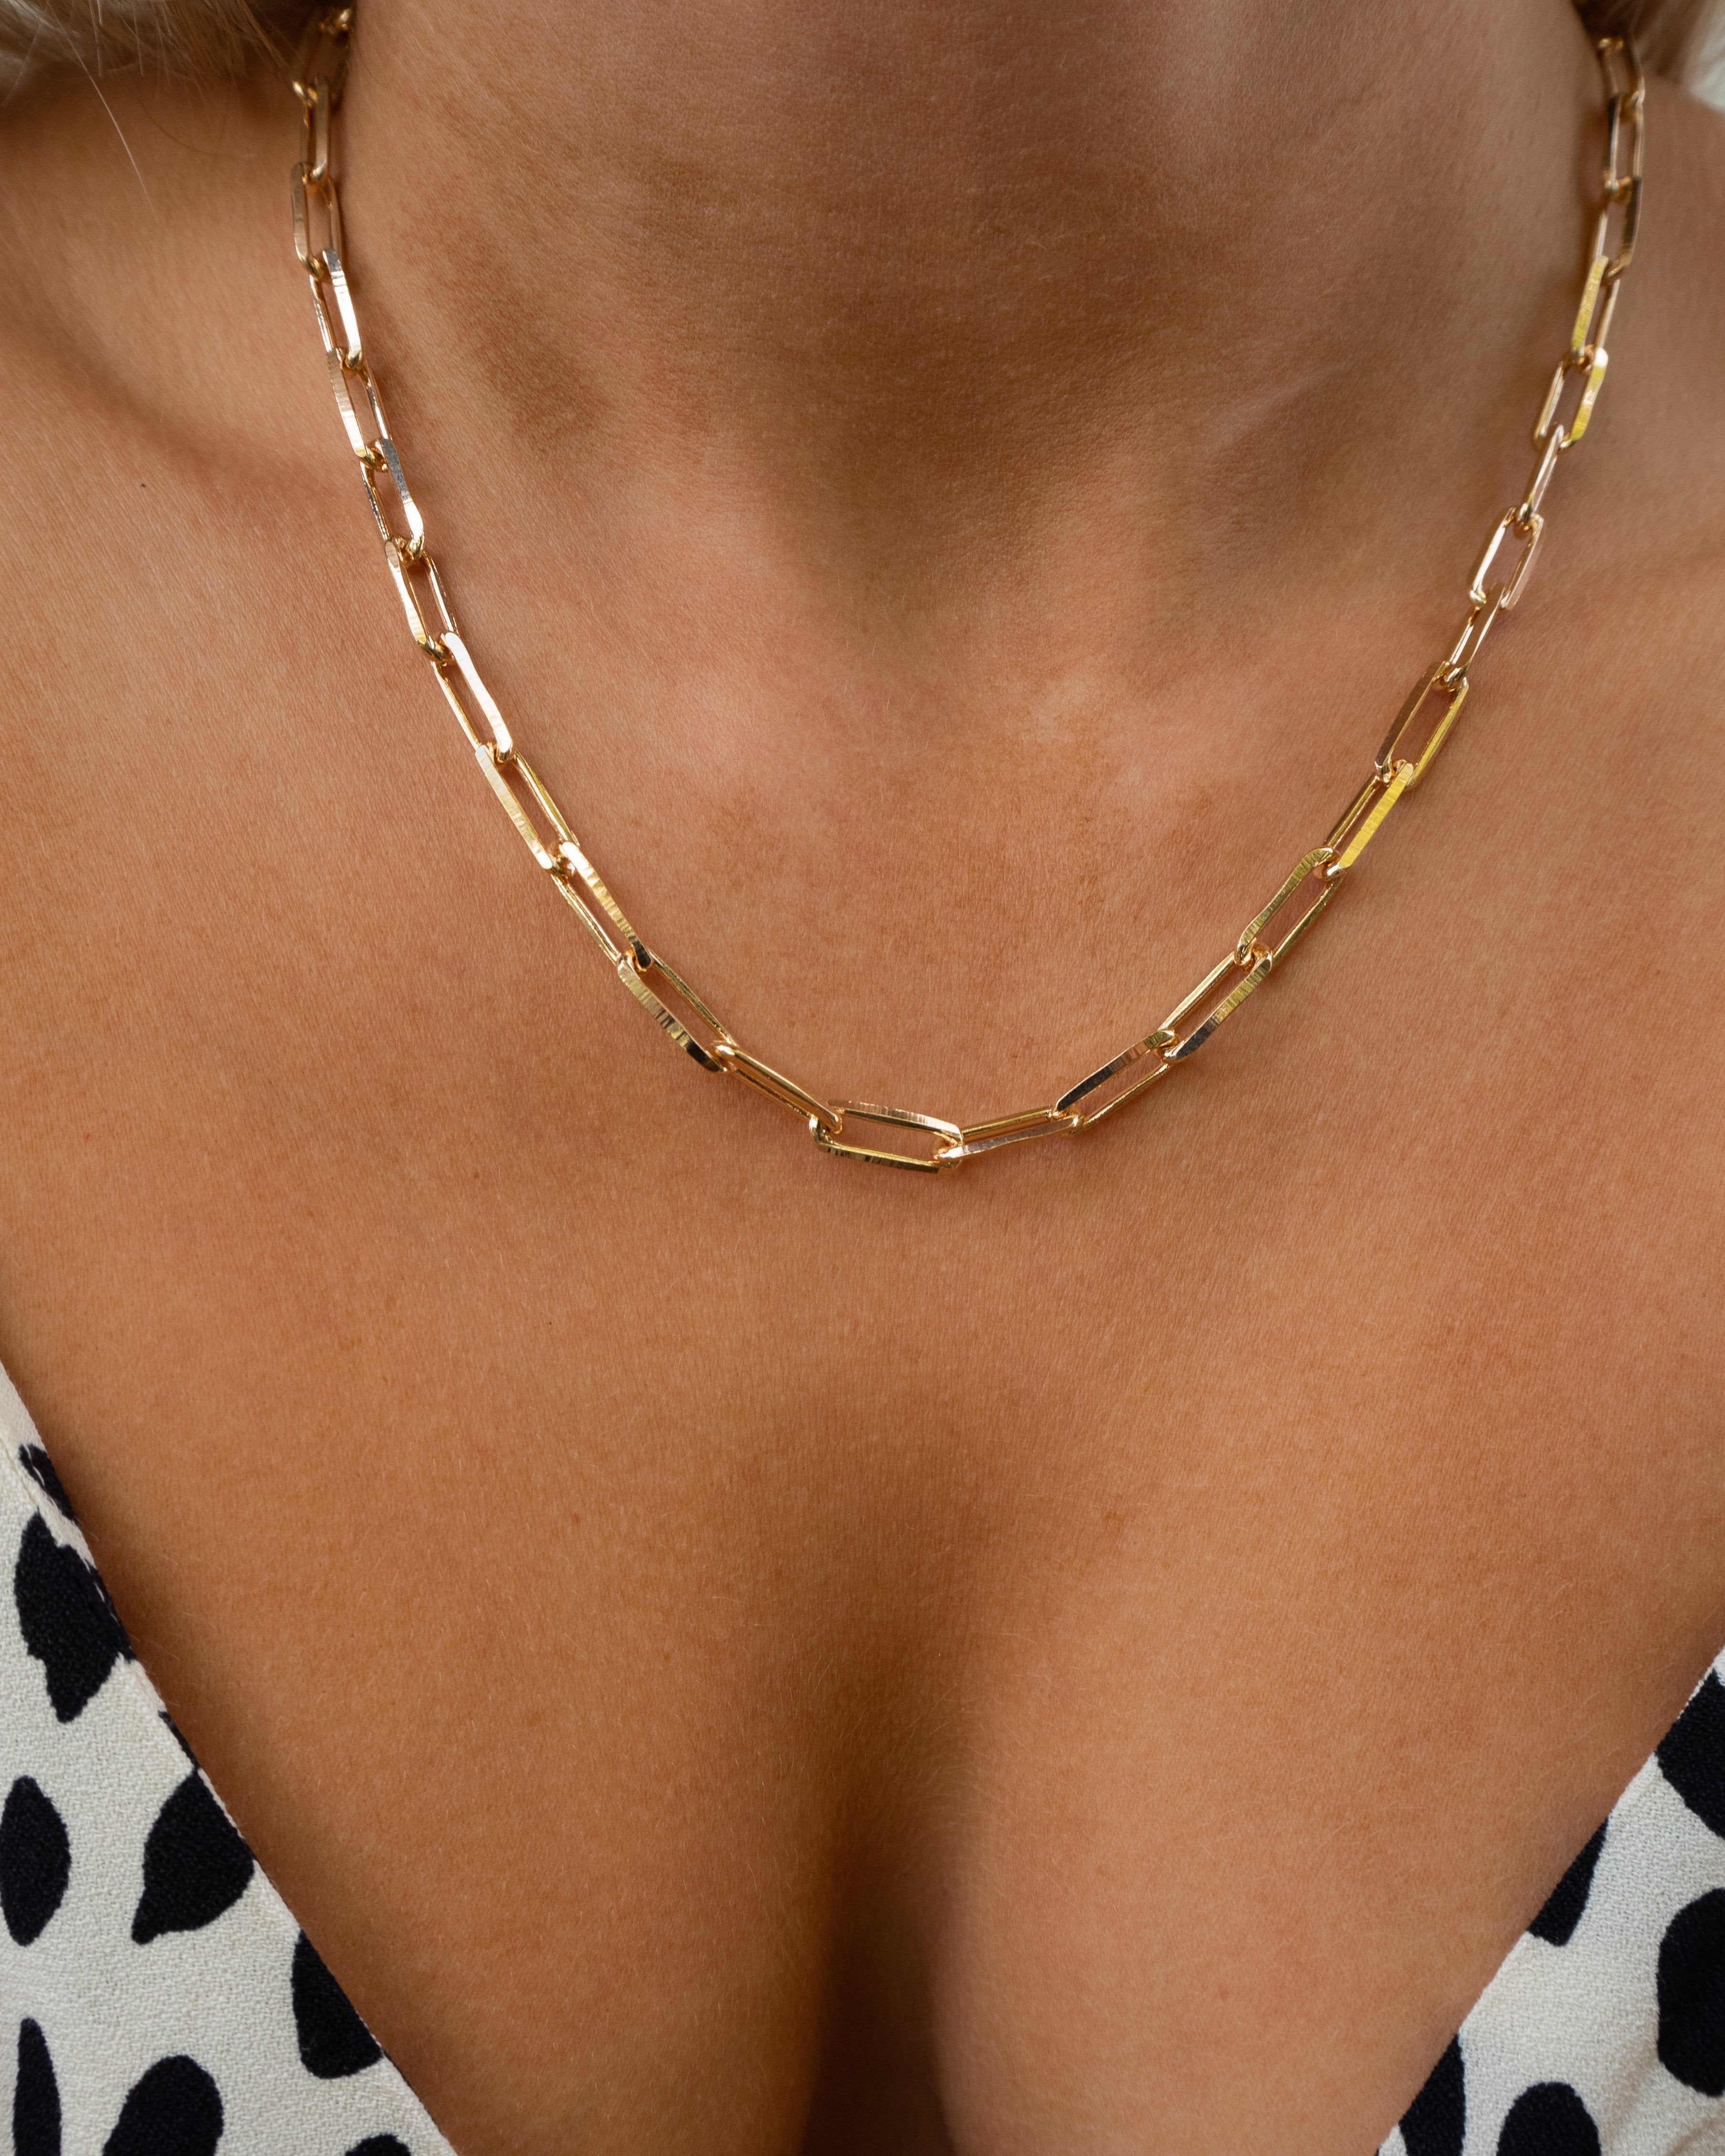 paperclip chain, paperclip necklace, chunky necklace, statement chain, statement necklace, chunky chain, layering chain, layering necklace, statement jewelry, layering chain, gold chain, dainty chain, dainty necklace, gold filled necklace, gold chain